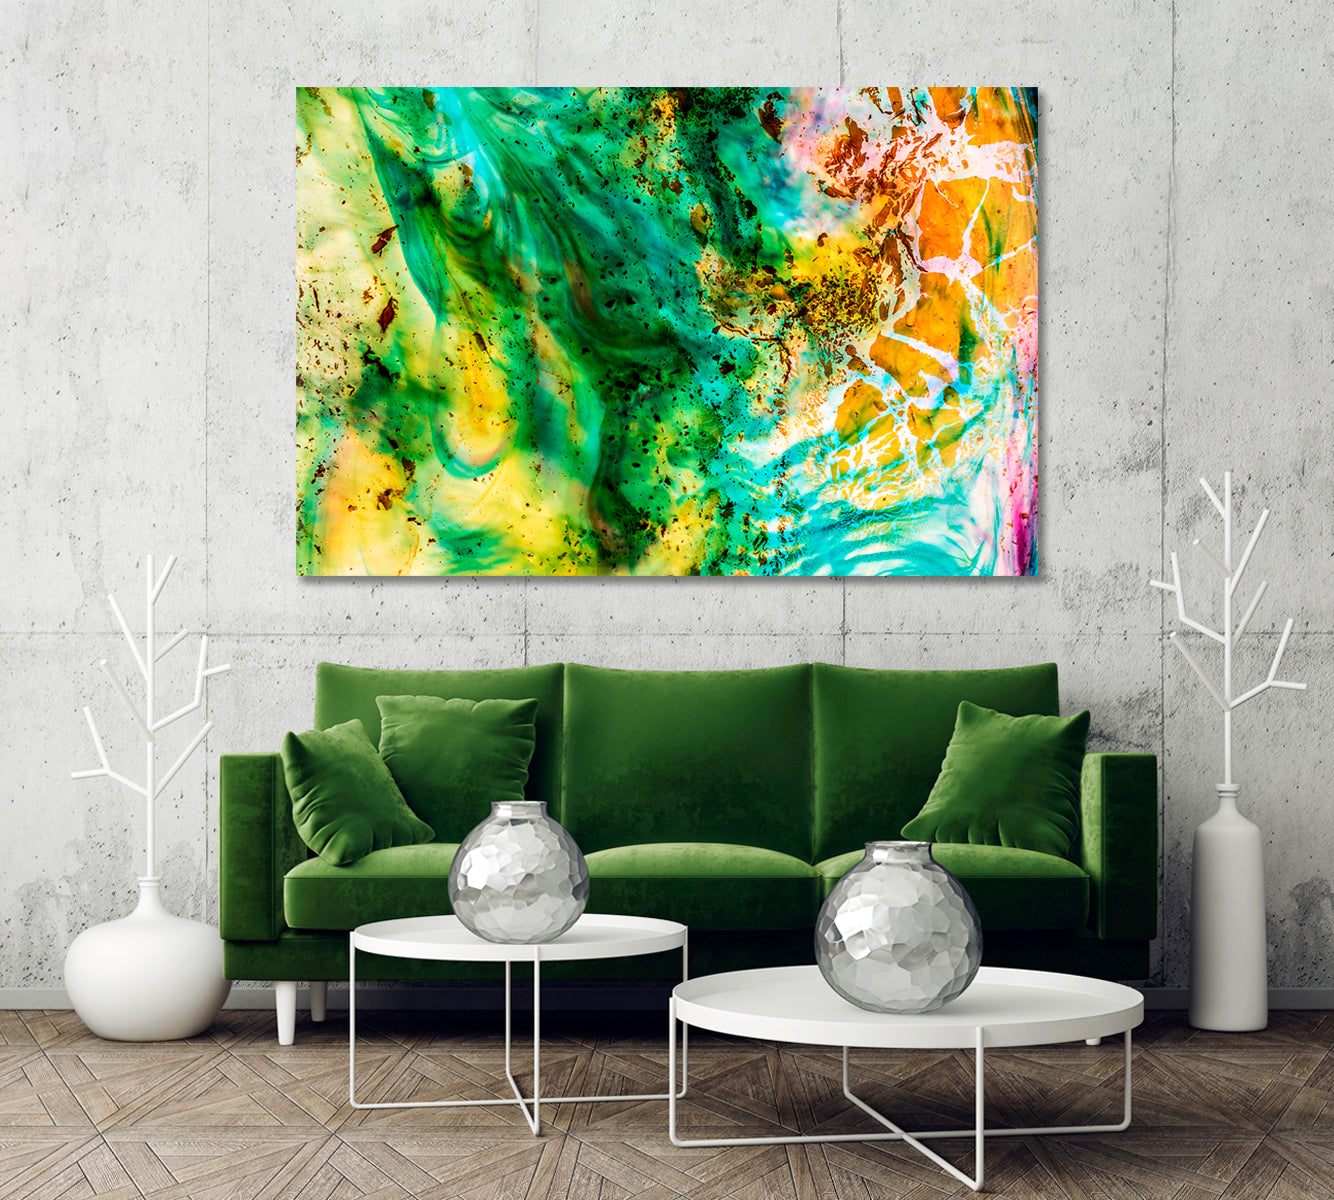 Colored Splashes Ink Abstract Paint Canvas Print-Canvas Print-CetArt-1 Panel-24x16 inches-CetArt